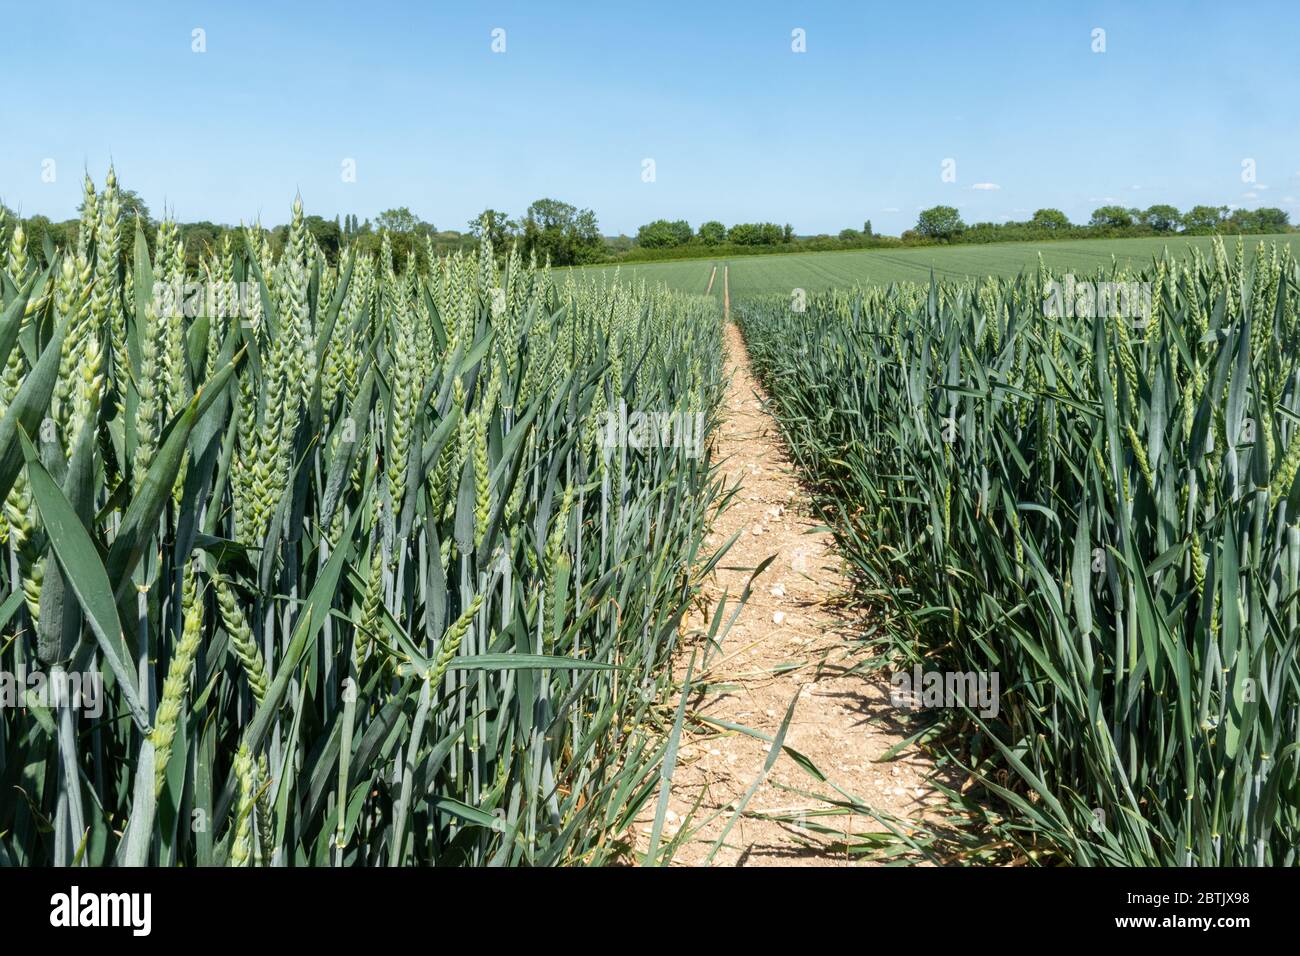 Arable field or farmland growing a crop of wheat in May, UK. Stock Photo